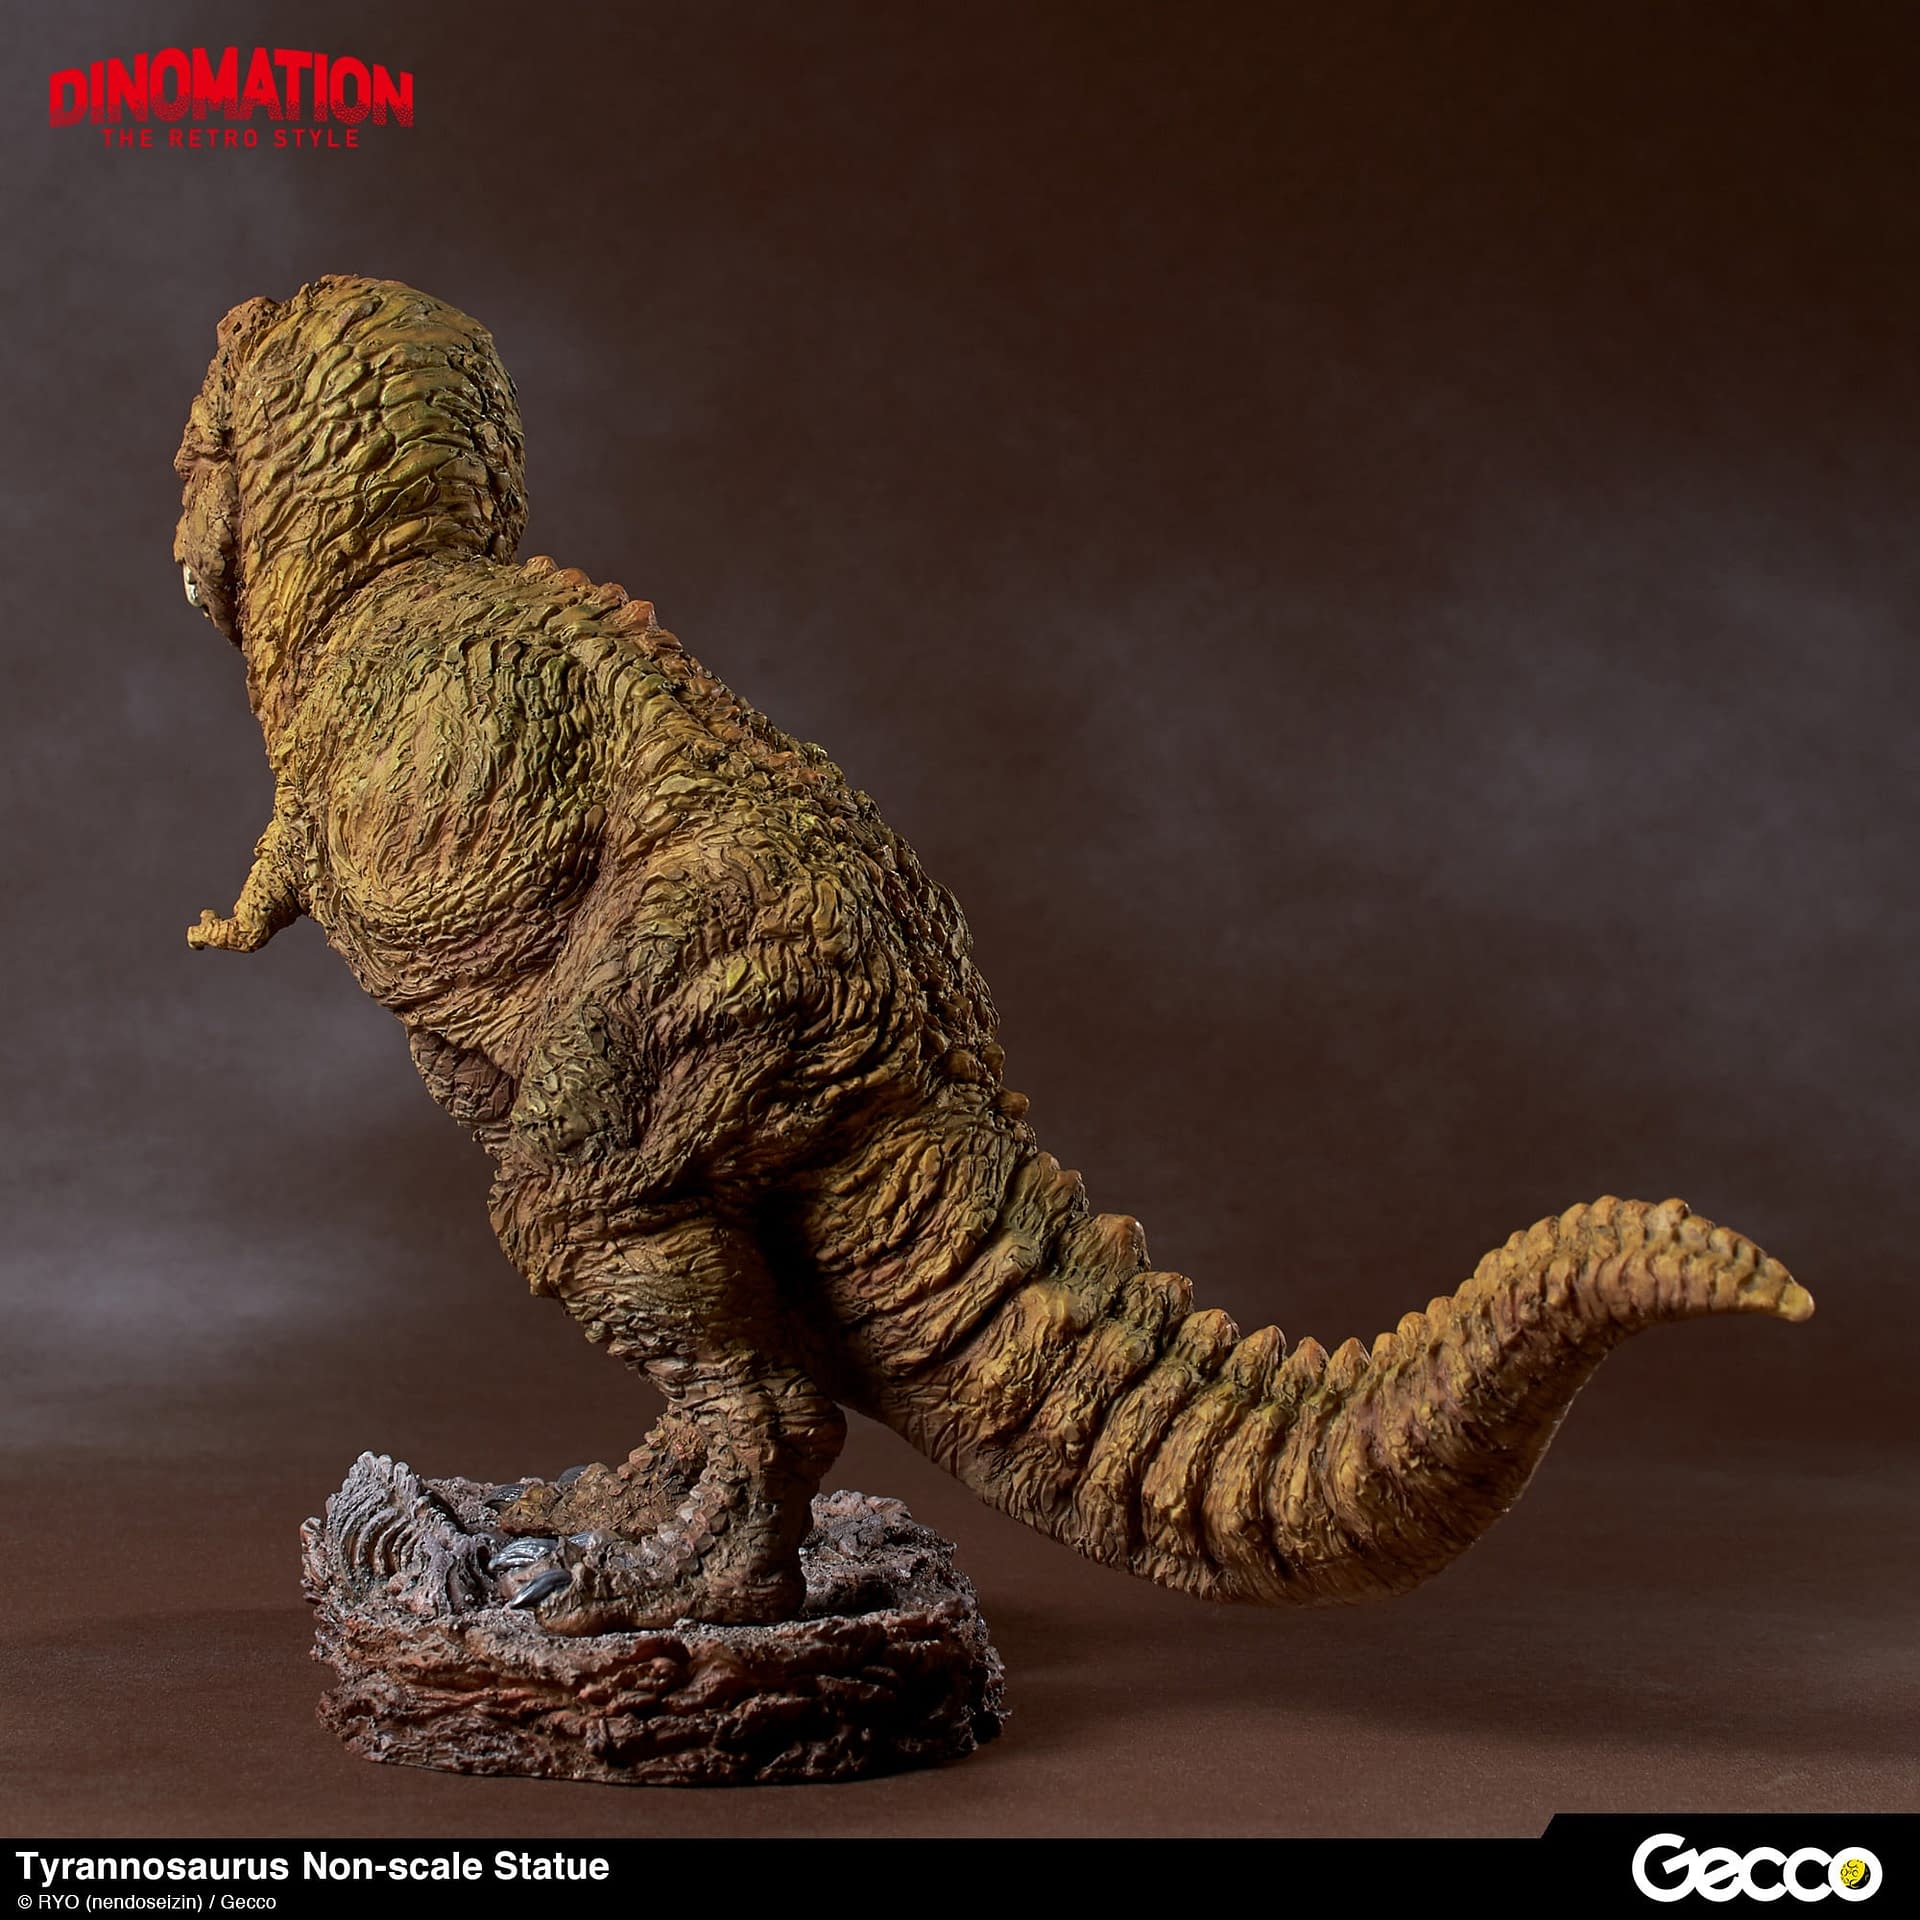 Gecco Brings Dinomation Back to Life with New Tyrannosaurus Rex Statue 